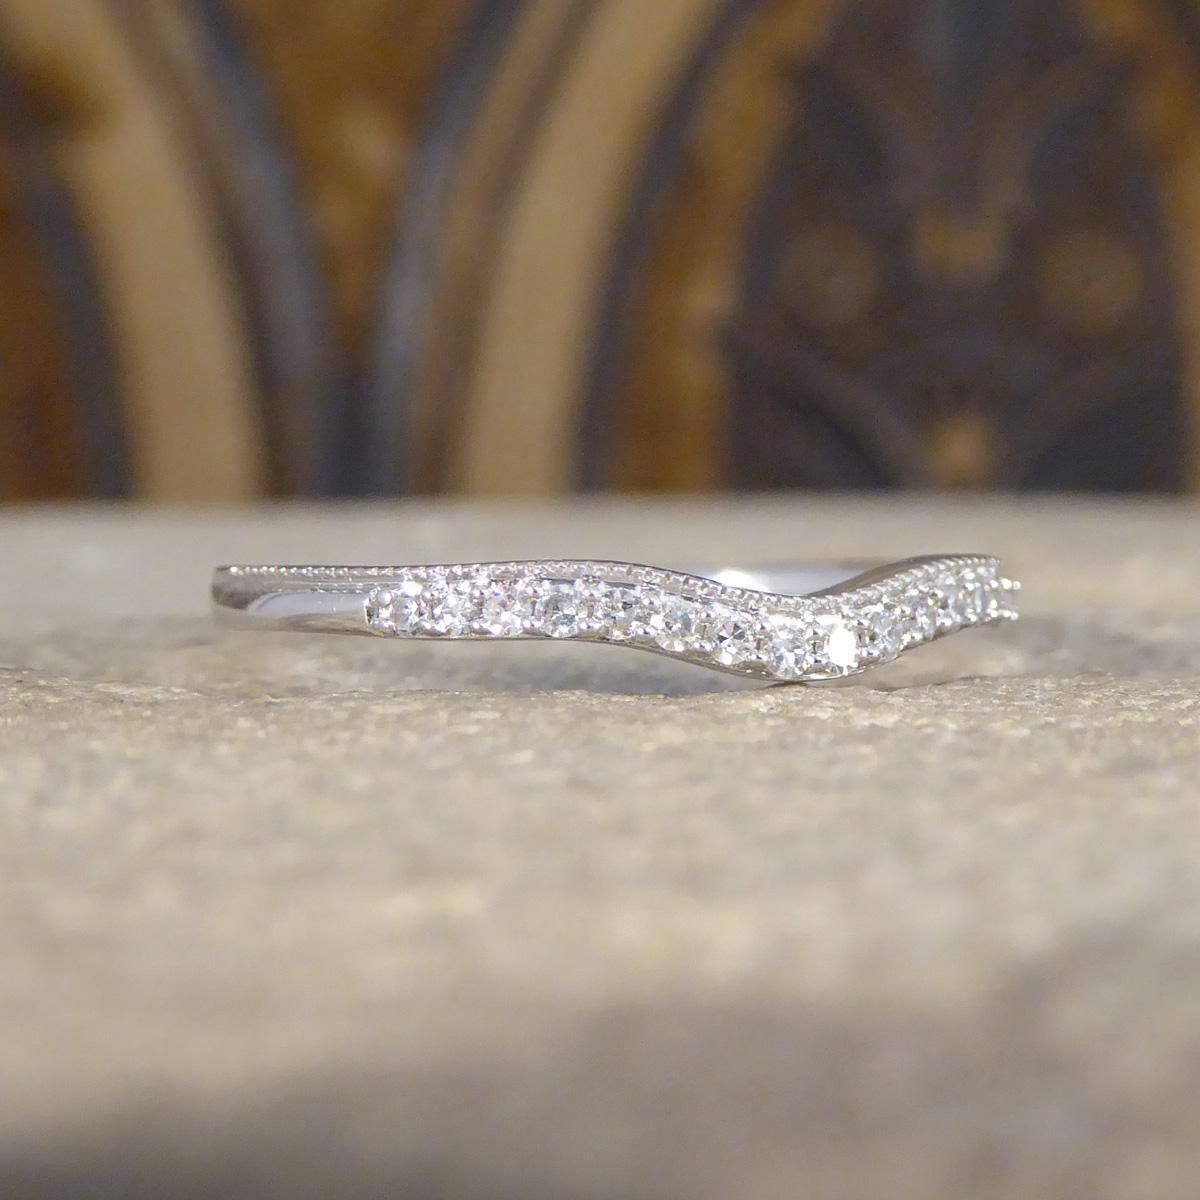 A lovely fine Diamond set ring. This ring features 16 small Diamond weighing a total of 0.10ct across the head of a beautiful 18ct White Gold ring with a slight curved wishbone with a milgrain edge on top. The shape of this ring is designed to sit